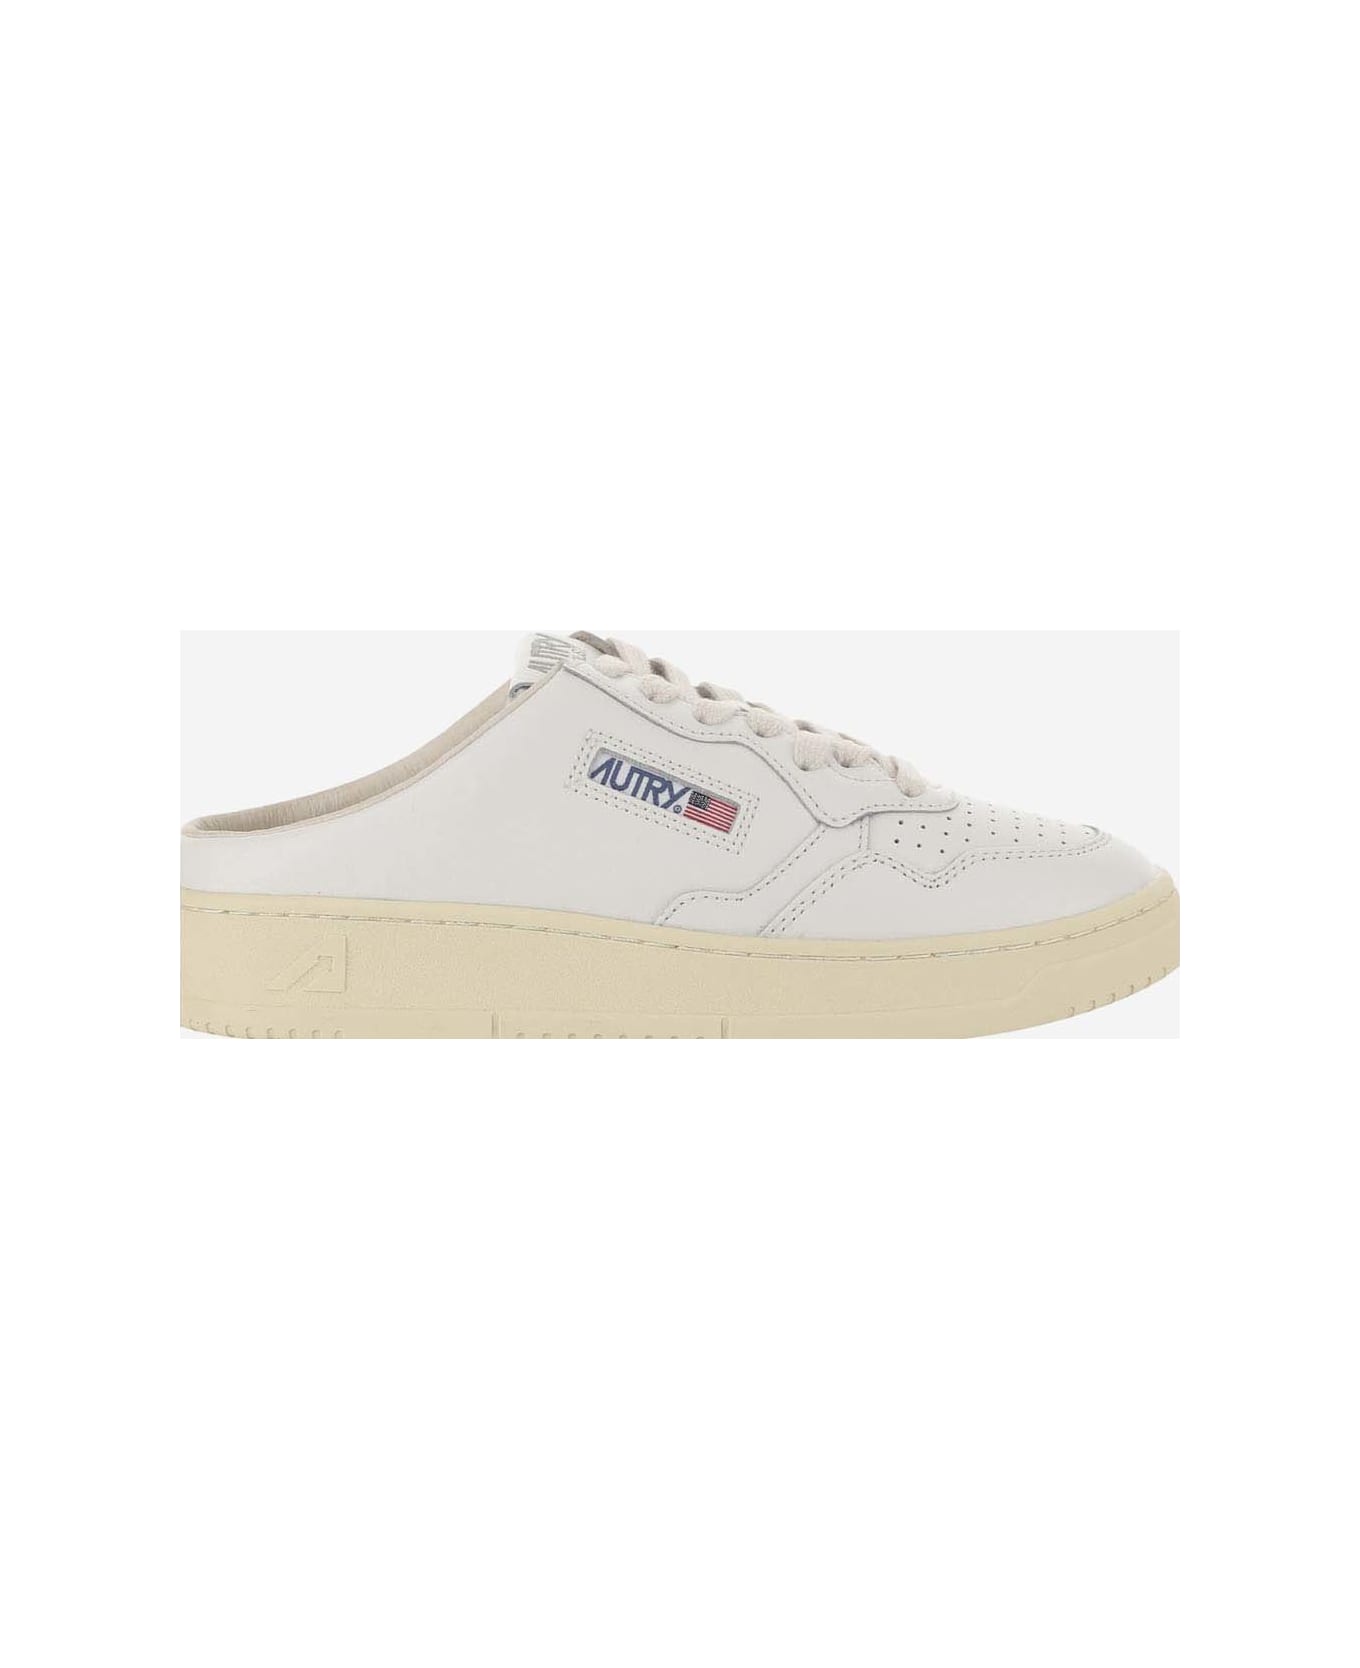 Autry Medalist Mule Low Leather Sneakers - Wht/wht